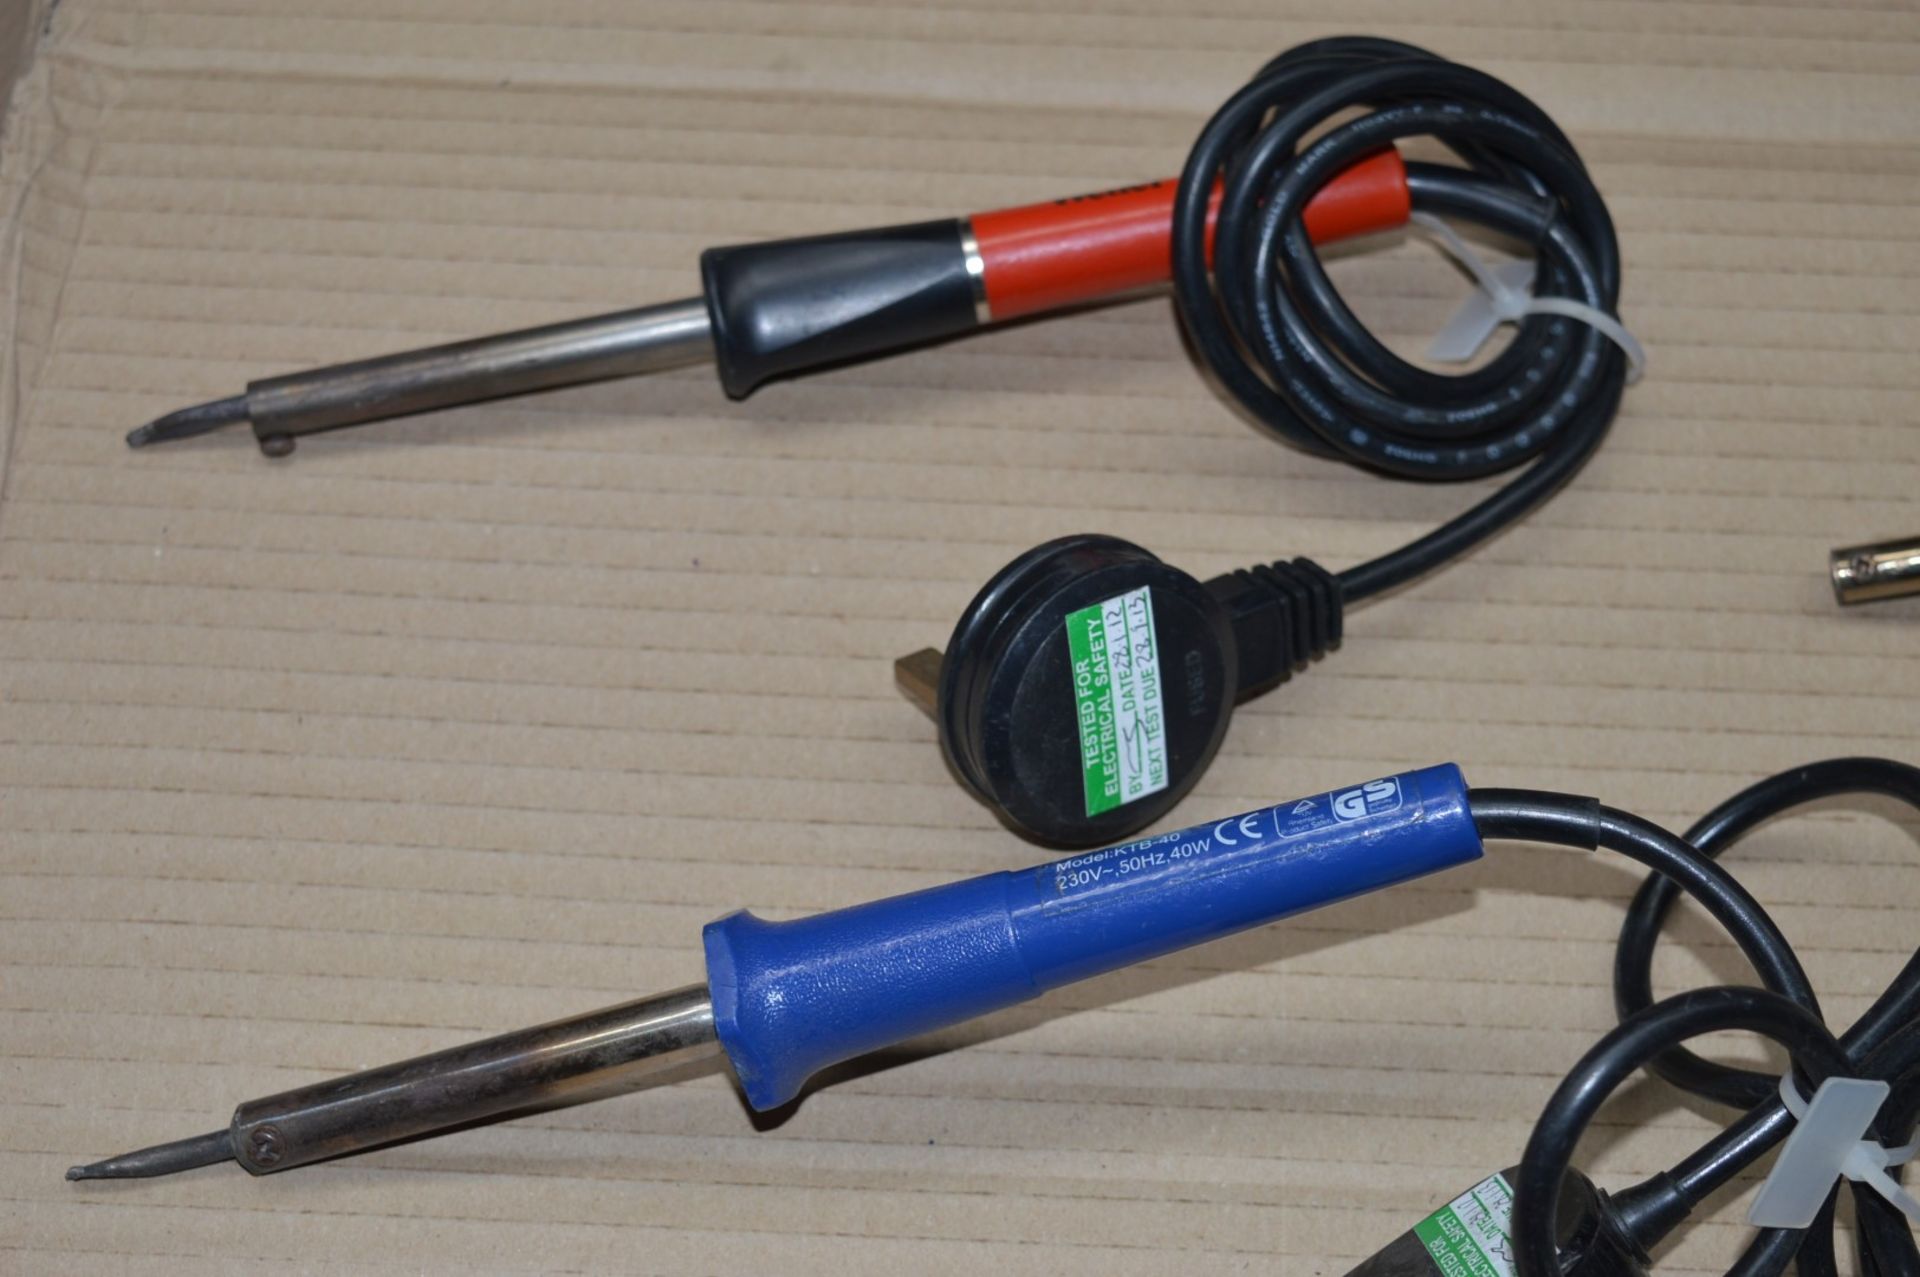 6 x Various 240v Soldering Irons - Brands Include Weller and Draper - CL300 - Ref JP105 - - Image 9 of 22